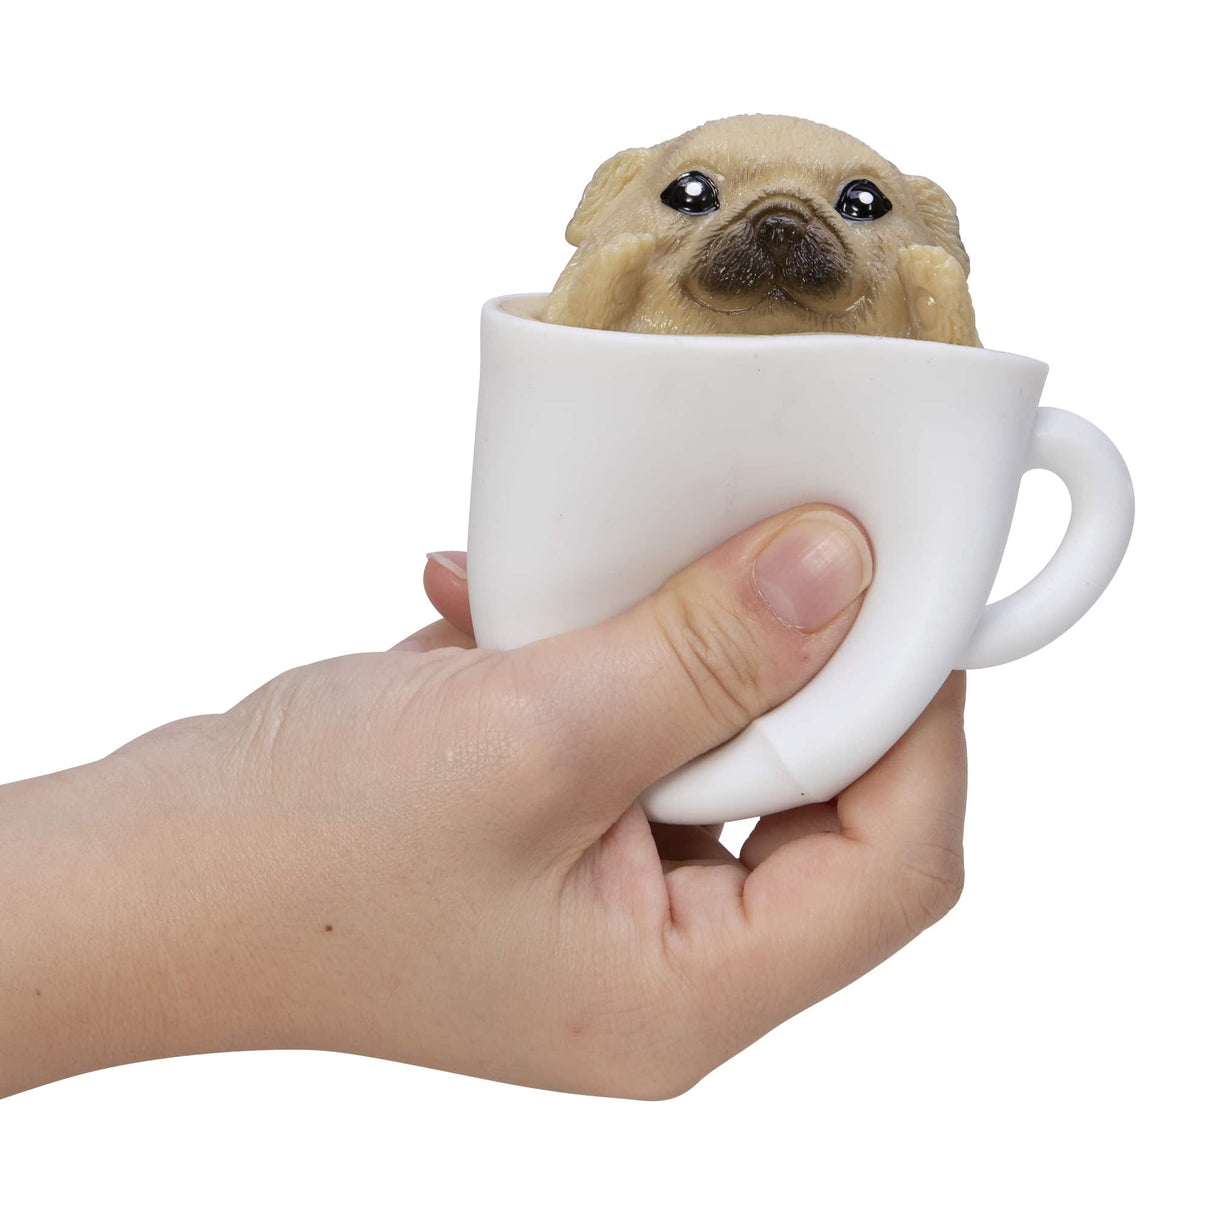 Pup in a Cup!